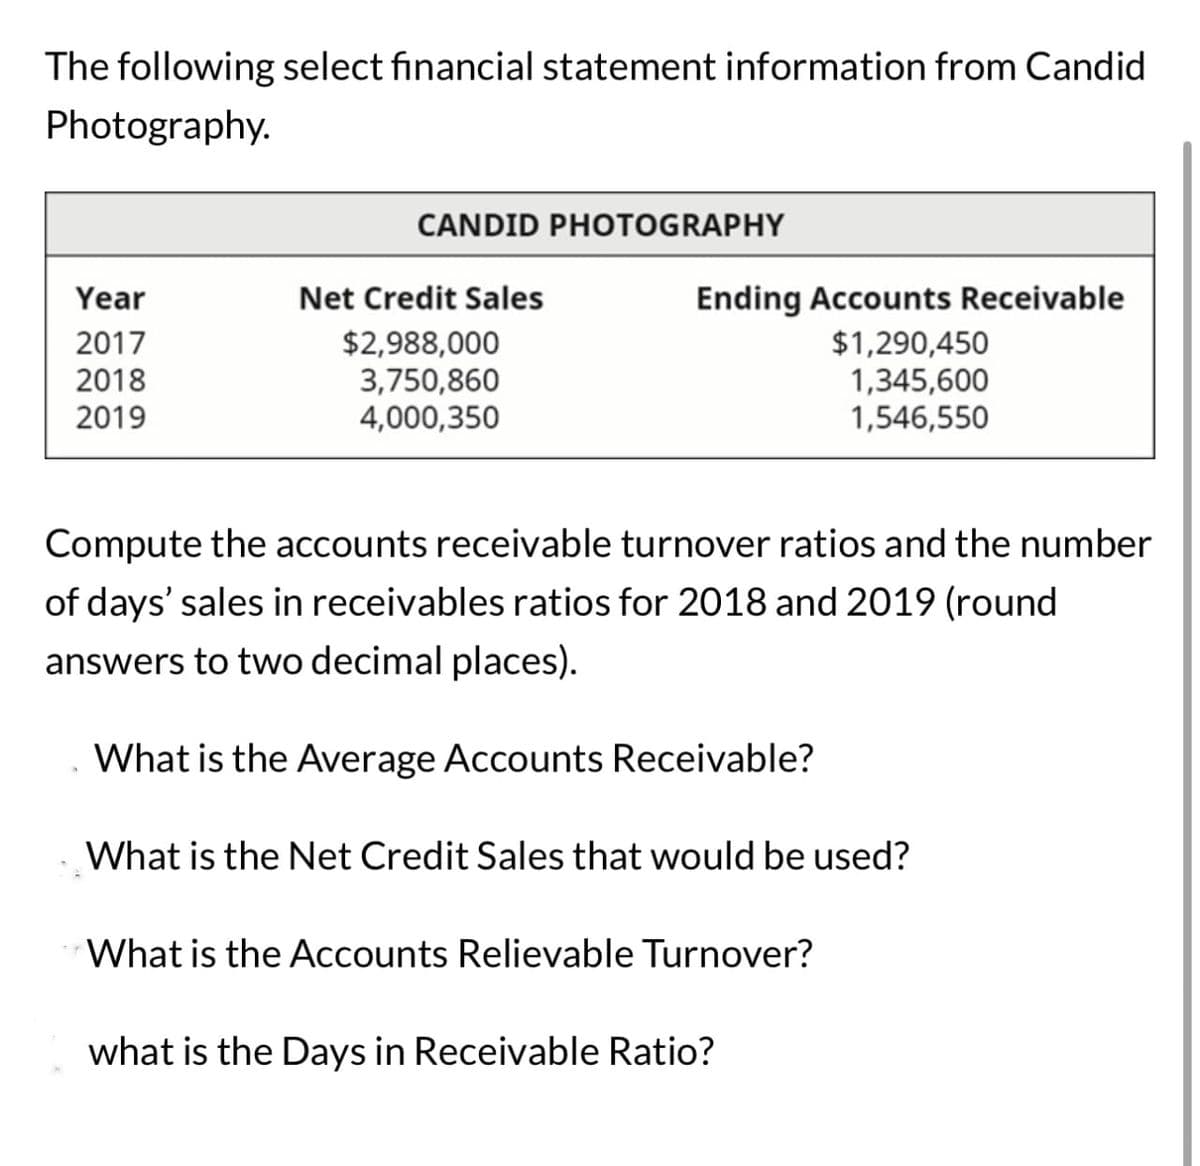 The following select financial statement information from Candid
Photography.
CANDID PHOTOGRAPHY
Year
Net Credit Sales
Ending Accounts Receivable
2017
$2,988,000
$1,290,450
2018
2019
3,750,860
4,000,350
1,345,600
1,546,550
Compute the accounts receivable turnover ratios and the number
of days' sales in receivables ratios for 2018 and 2019 (round
answers to two decimal places).
What is the Average Accounts Receivable?
What is the Net Credit Sales that would be used?
What is the Accounts Relievable Turnover?
what is the Days in Receivable Ratio?